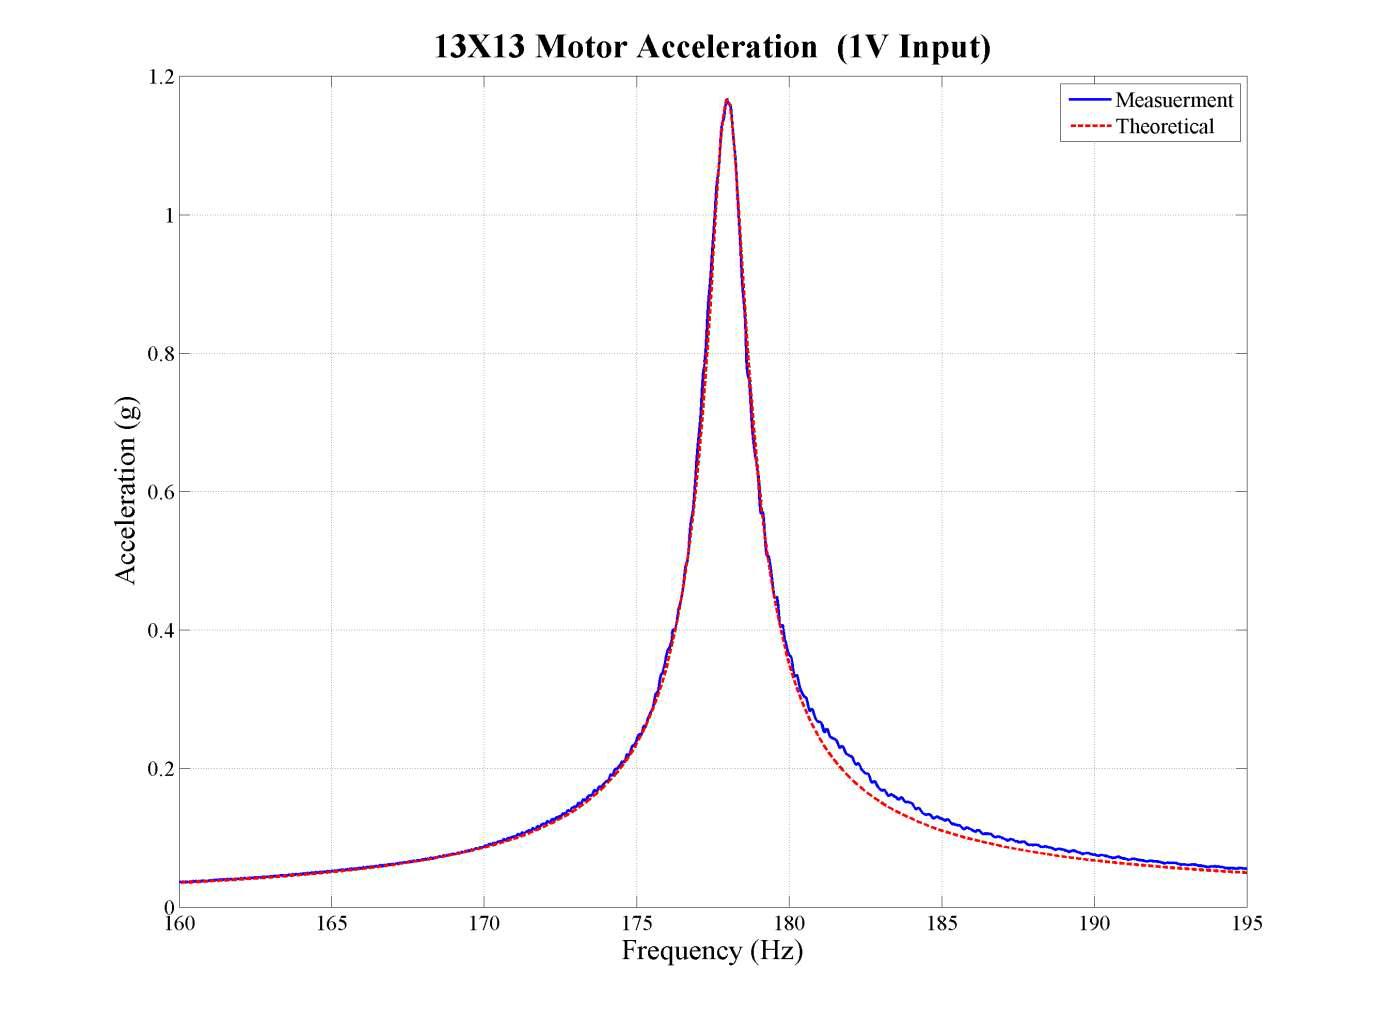 Compare measurement acceleration with theoretical acceleration